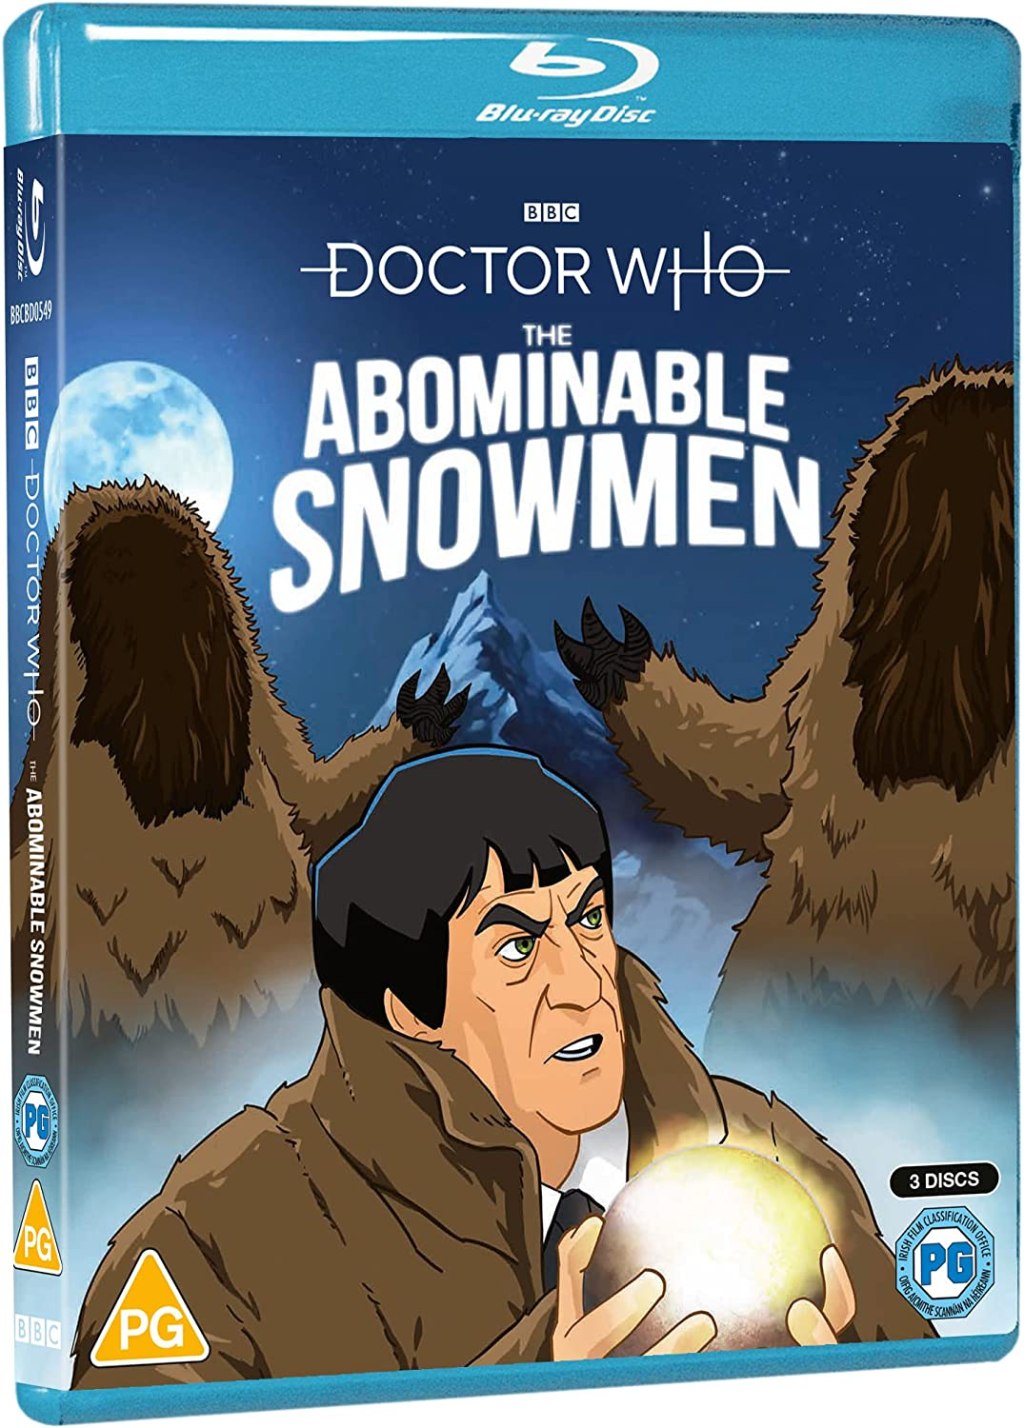 Doctor Who: The Abominable Snowmen (1967) review and Blu-ray preview [BFI Event]